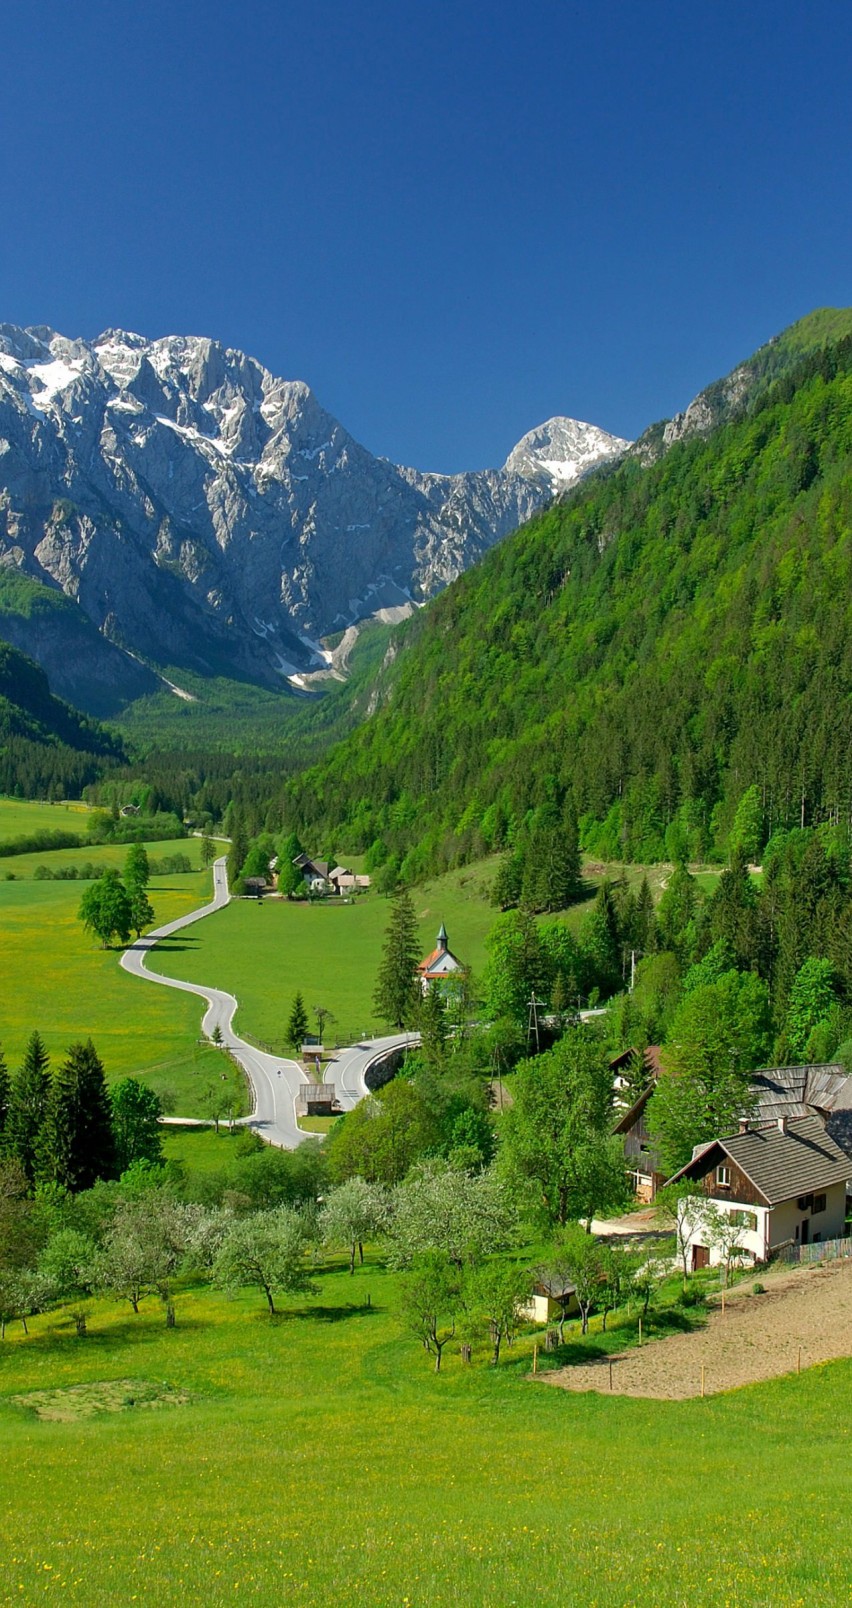 Spring In The Alpine Valley HD Wallpaper For iPhone HDwallpaper